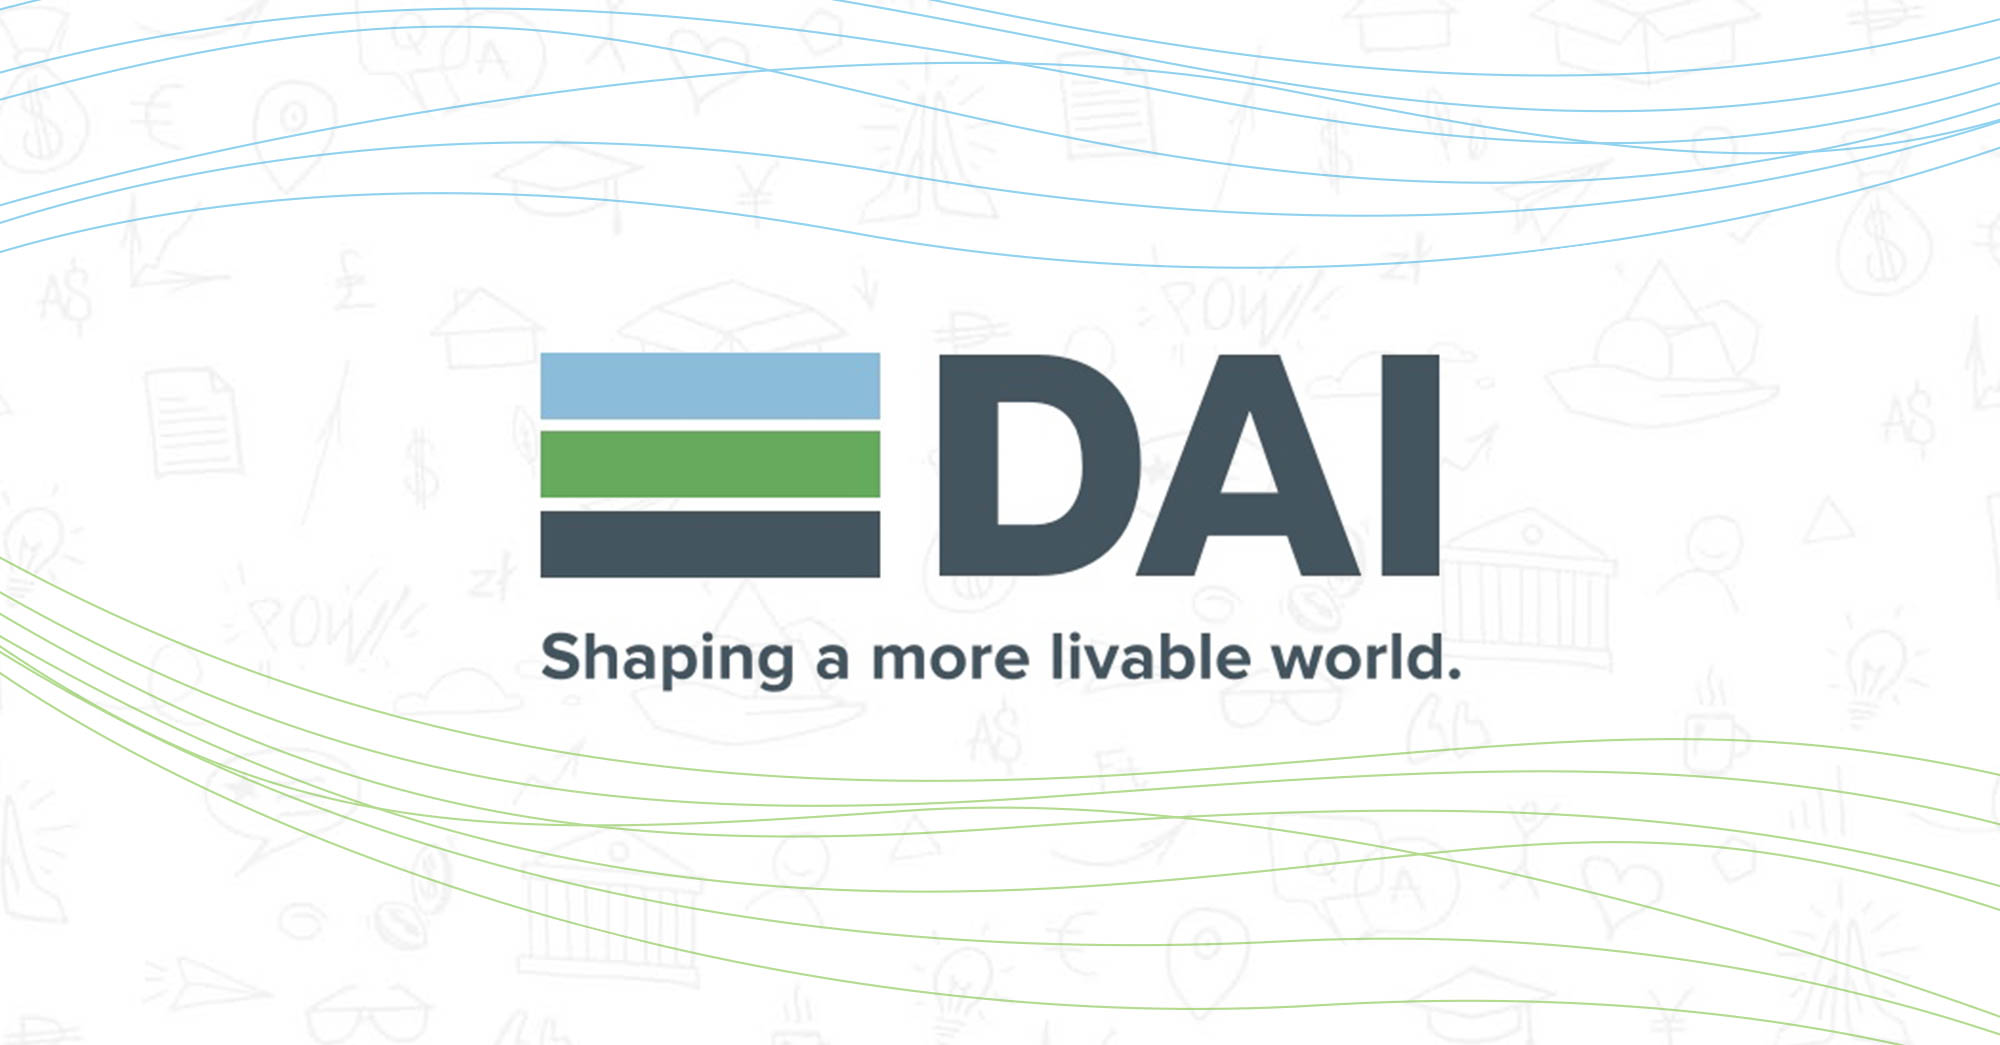 Global Shares Client, DAI Wins Award for Unique Employee Ownership Initiative